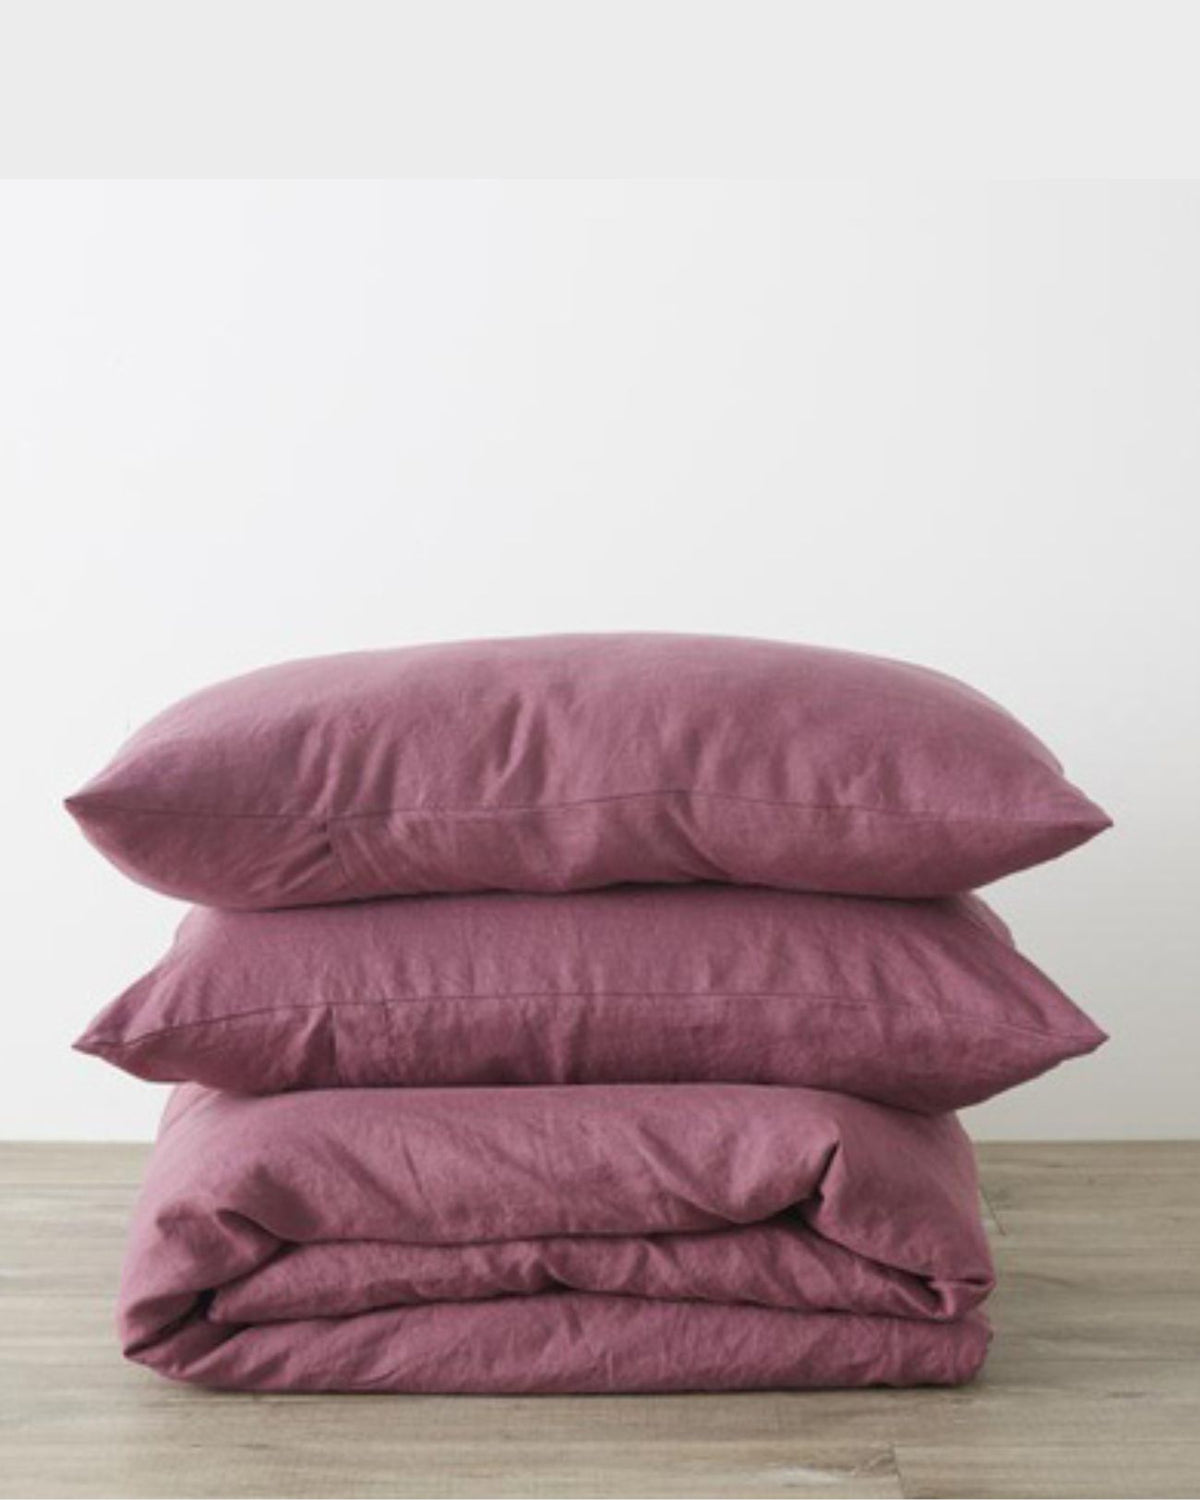 Plum duvet Cover Set. Kid's Linen Duvet Cover Set is made from 100% linen woven from European flax, pre-washed for softness and durability. Sustainable, linen fabric is produced from eco-friendly flax crops. Breathable, pure linen bedding will be temperate to sleep in, for both hot and cool sleepers. Easy care. 